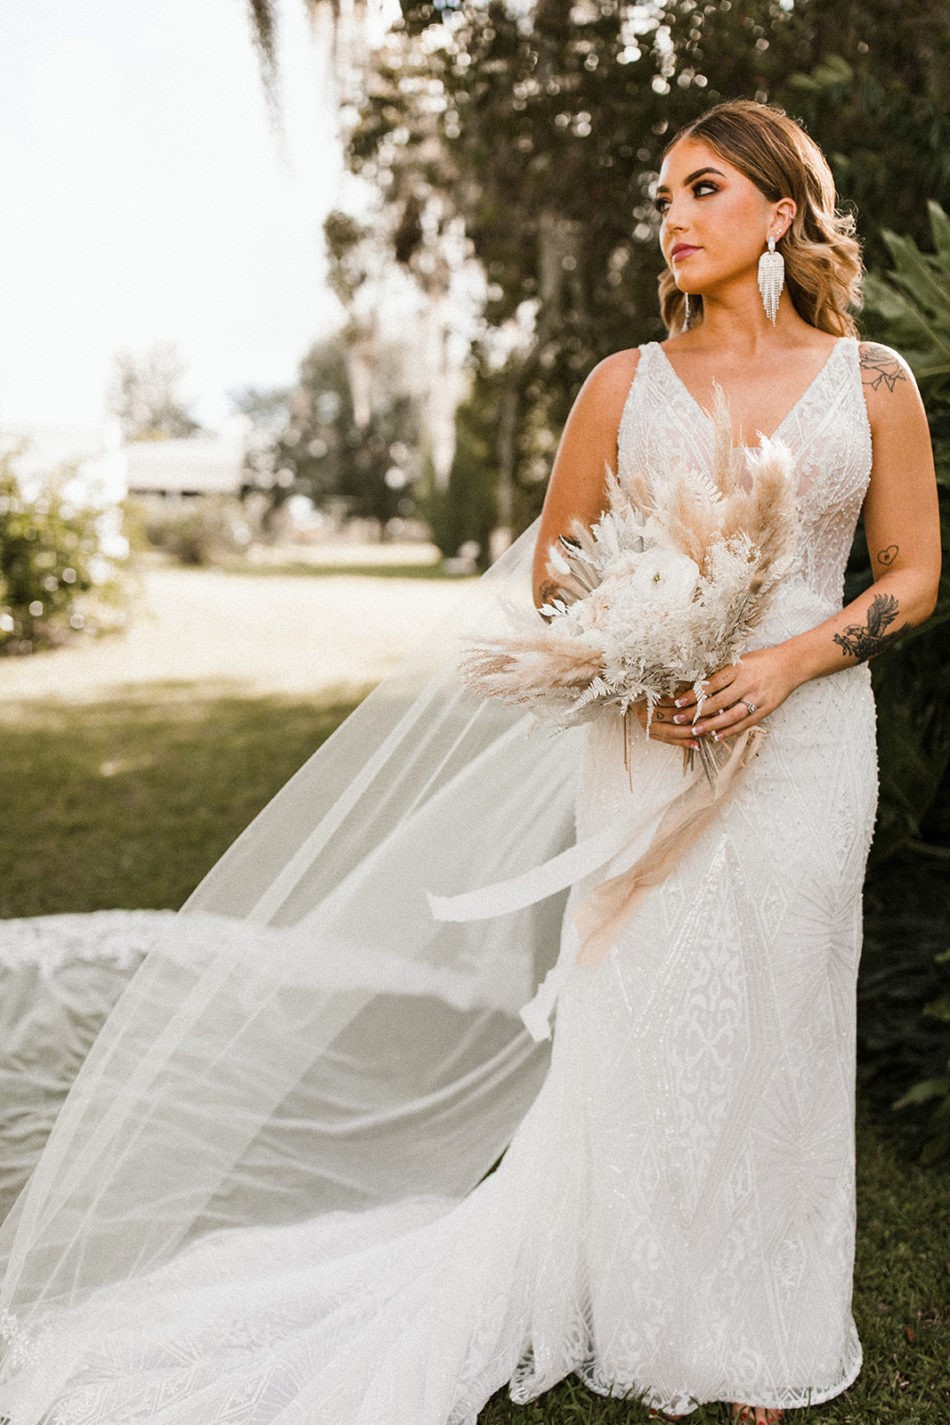 Real Bride Wearing Art Deco Sheath Wedding Dress Called Elaine by Maggie Sottero